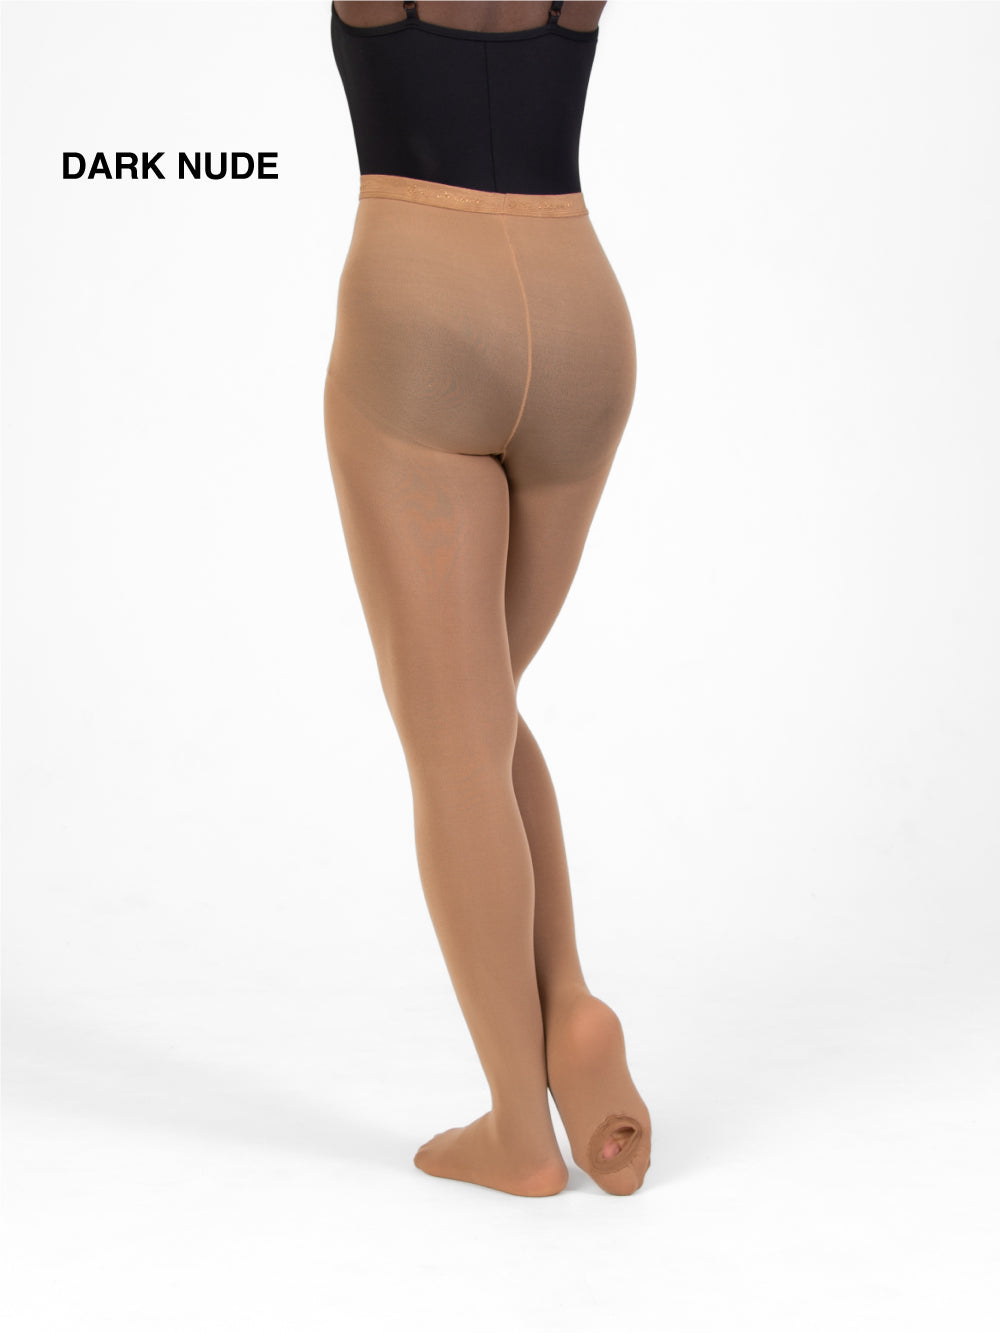 Body Wrappers Women's Convertible Dance Tights